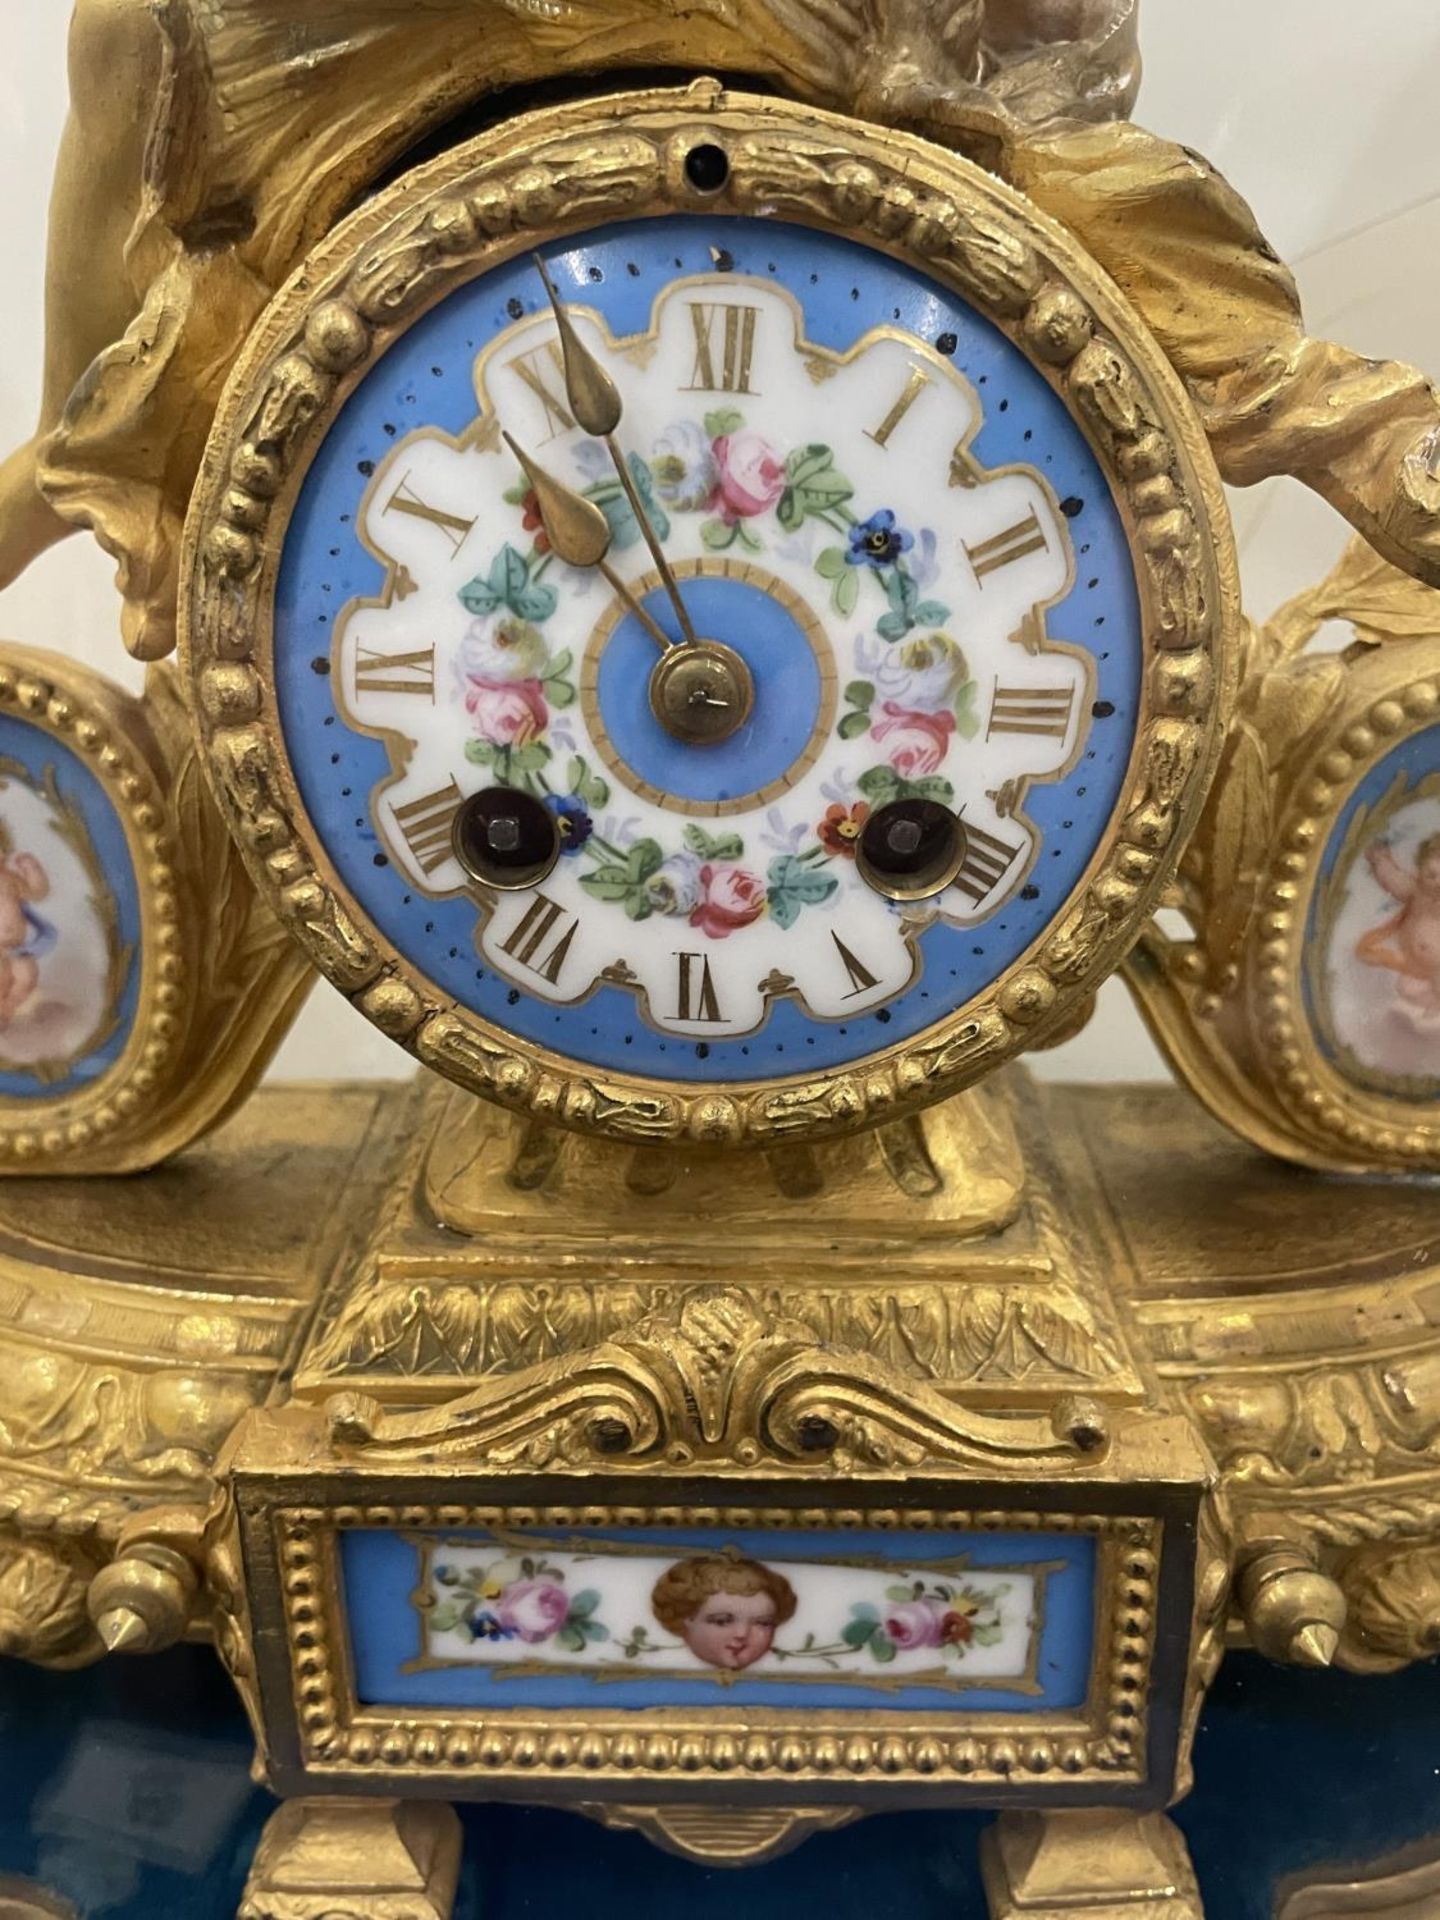 A VINTAGE FRENCH ORMOLU CLOCK WITH DECORATIVE ENAMEL FACE AND PANELS IN A GLASS DOME (A/F) - Image 6 of 10